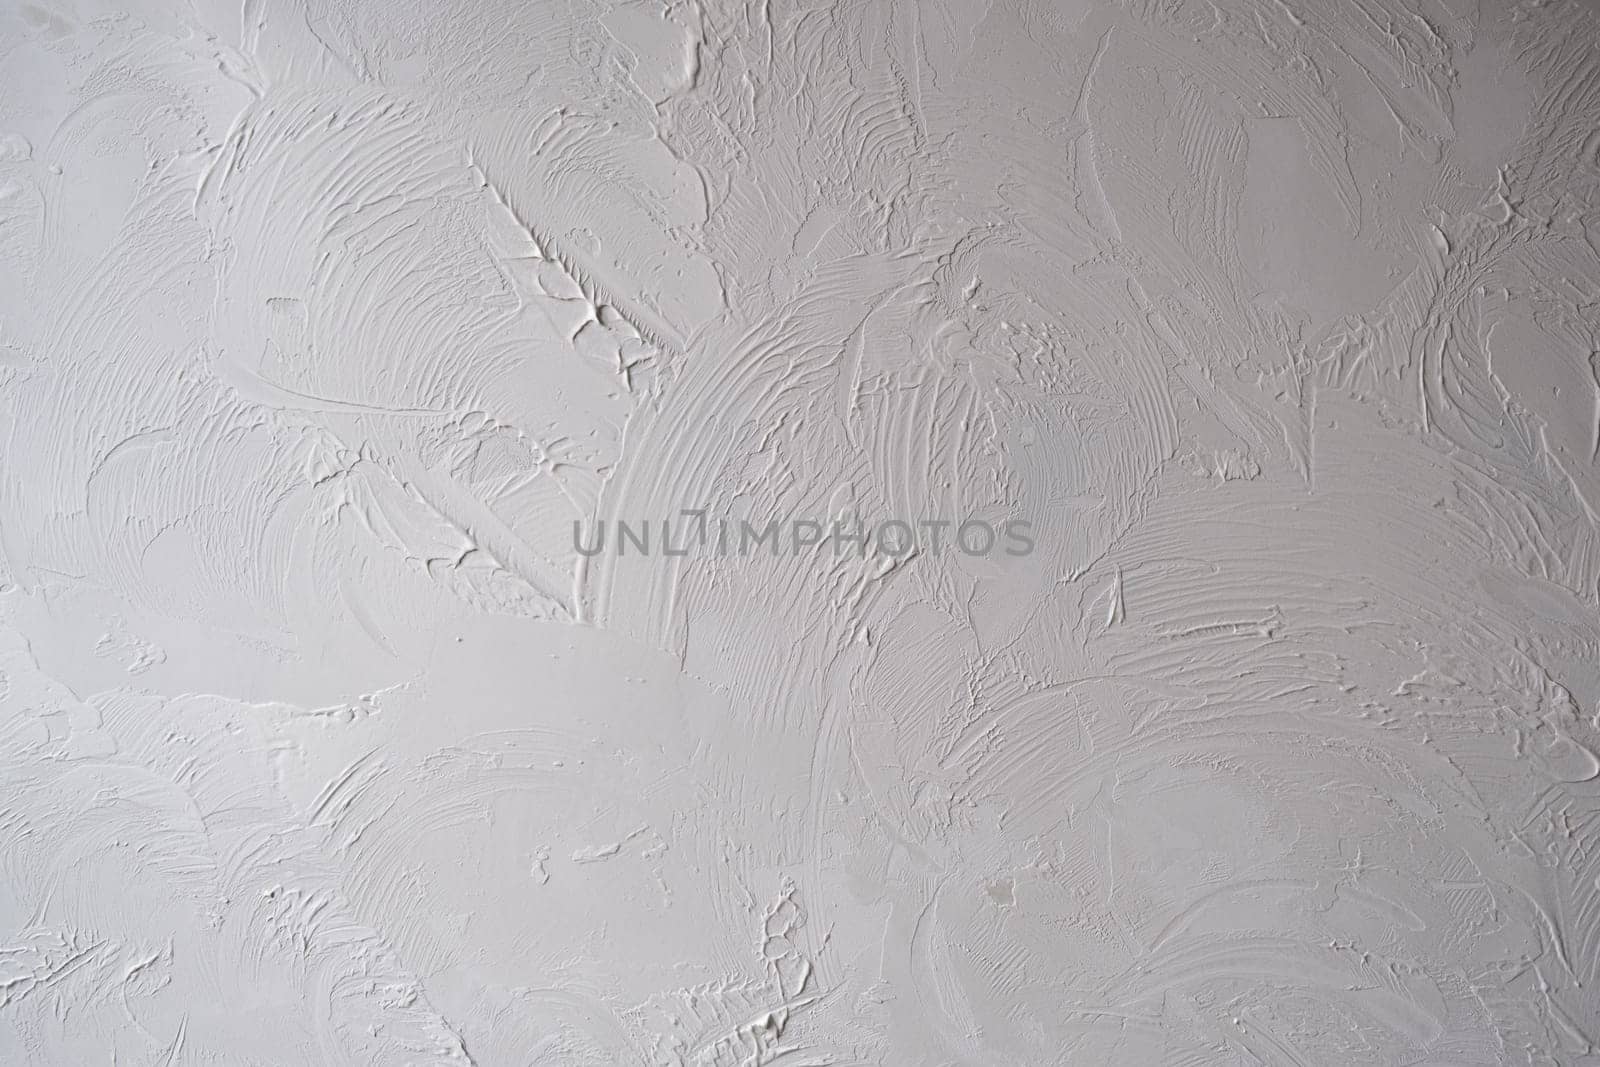 Applying decorative putty. White abstract texture of surface covered with putty. textured background of filler paste applied with putty knife in irregular dashes and strokes. Rough surface plaster